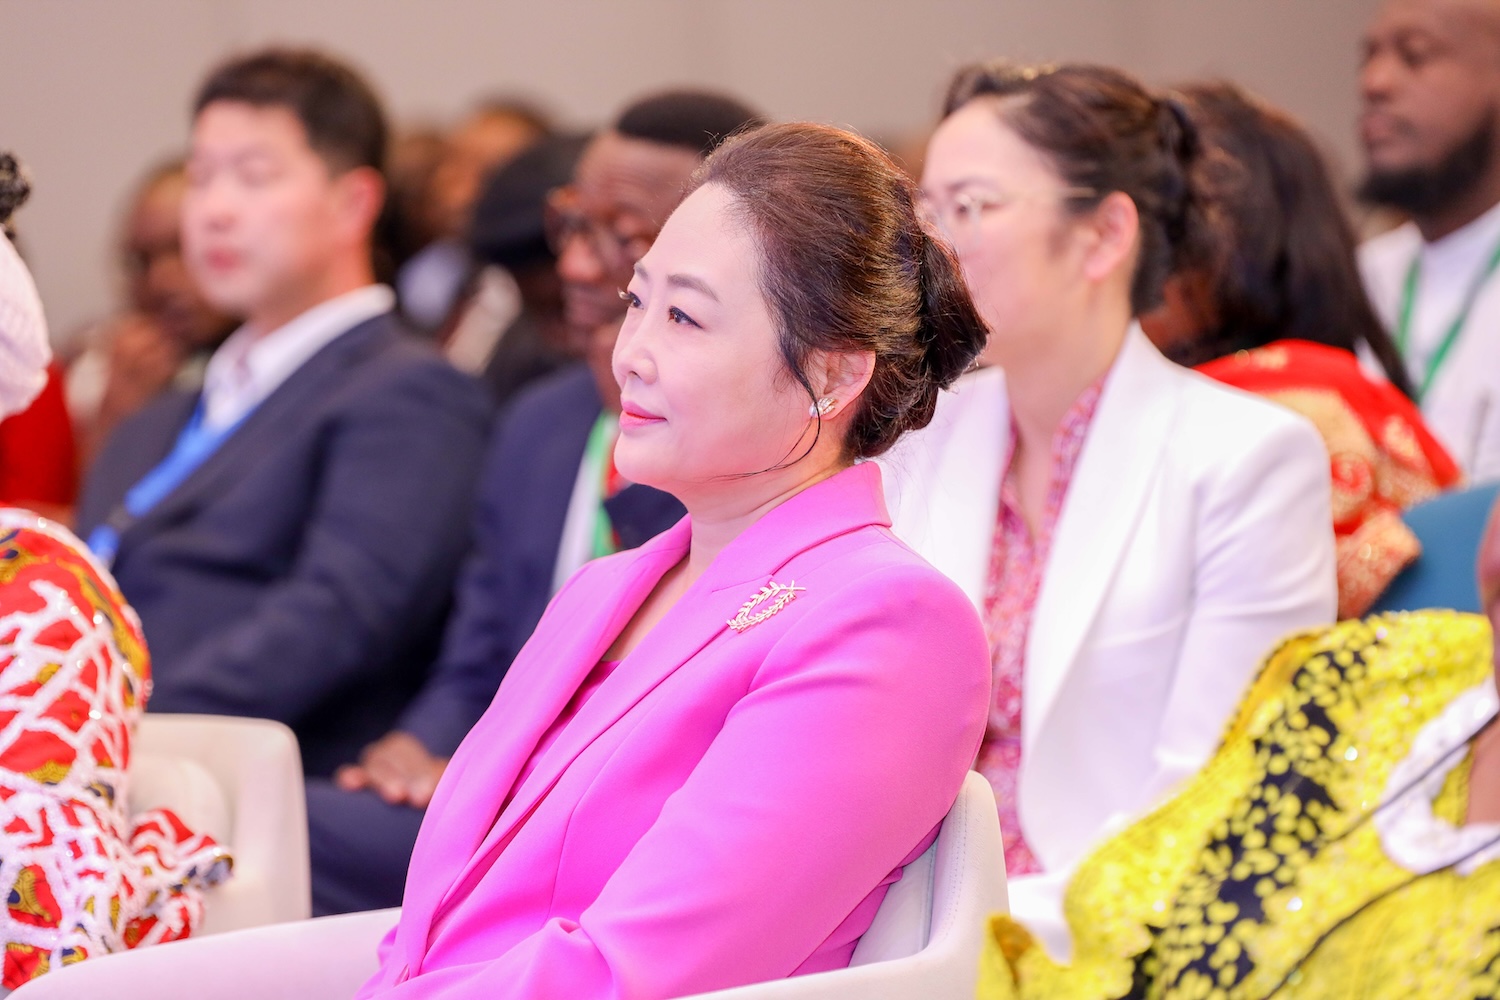 A woman in a pink blazer sits among other attendees at what appears to be the Family Track session of GPLC Africa 2024, a formal event or conference.